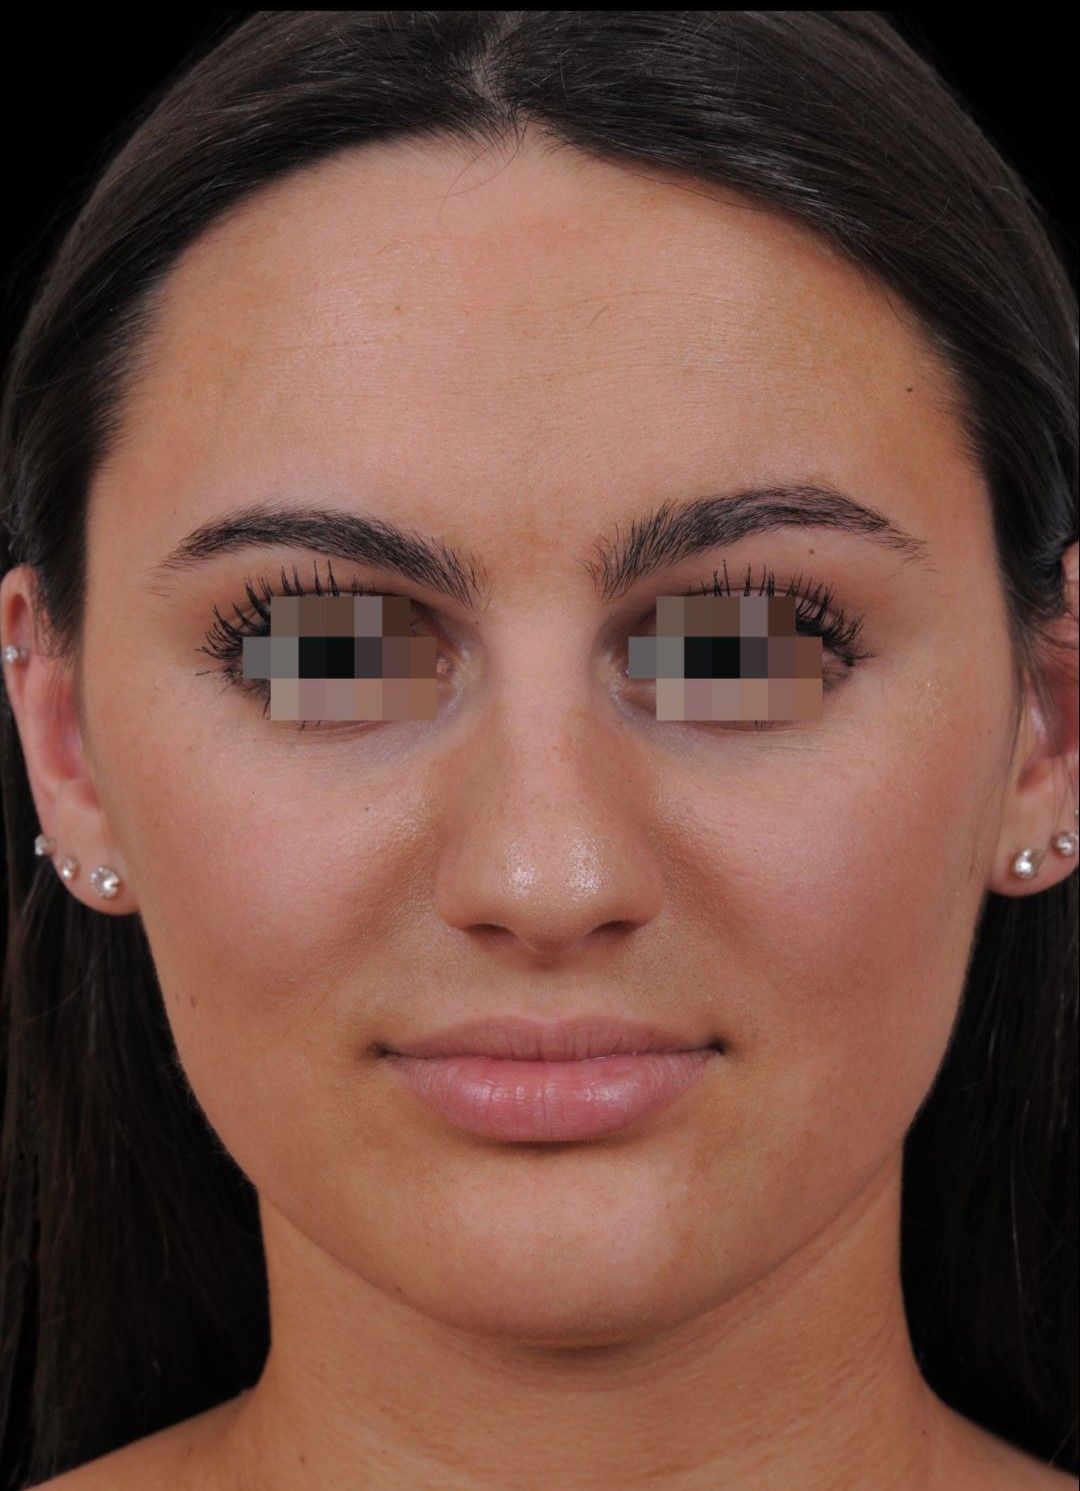 Photo of the patient’s face before the Rhinoplasty surgery. Patient 15 - Set 3